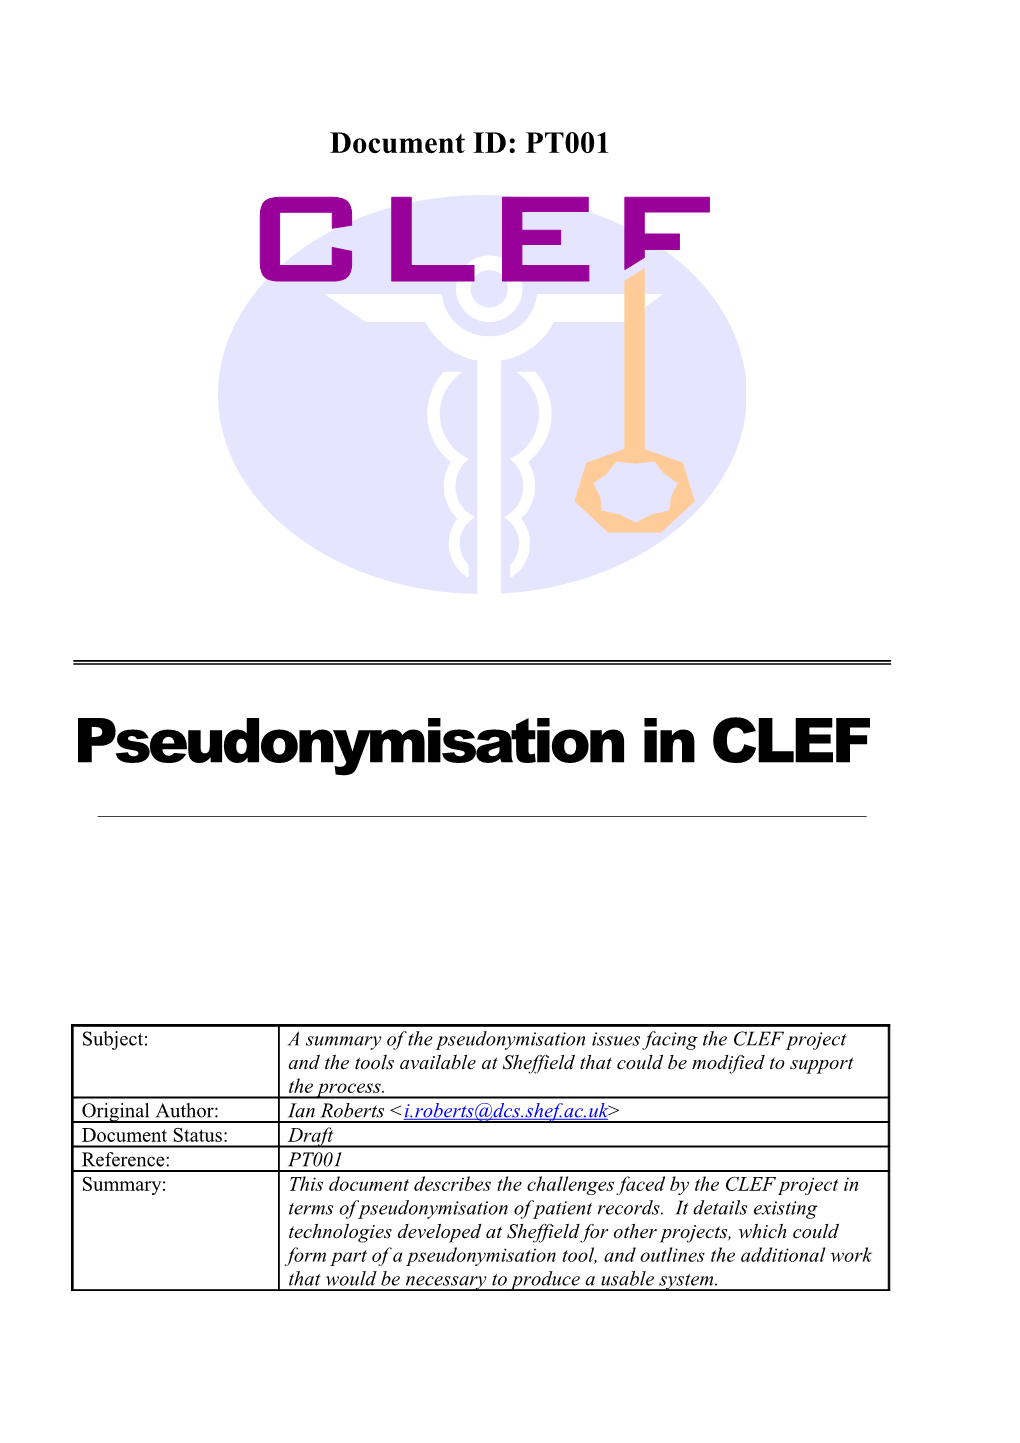 Pseudonymisation in CLEF